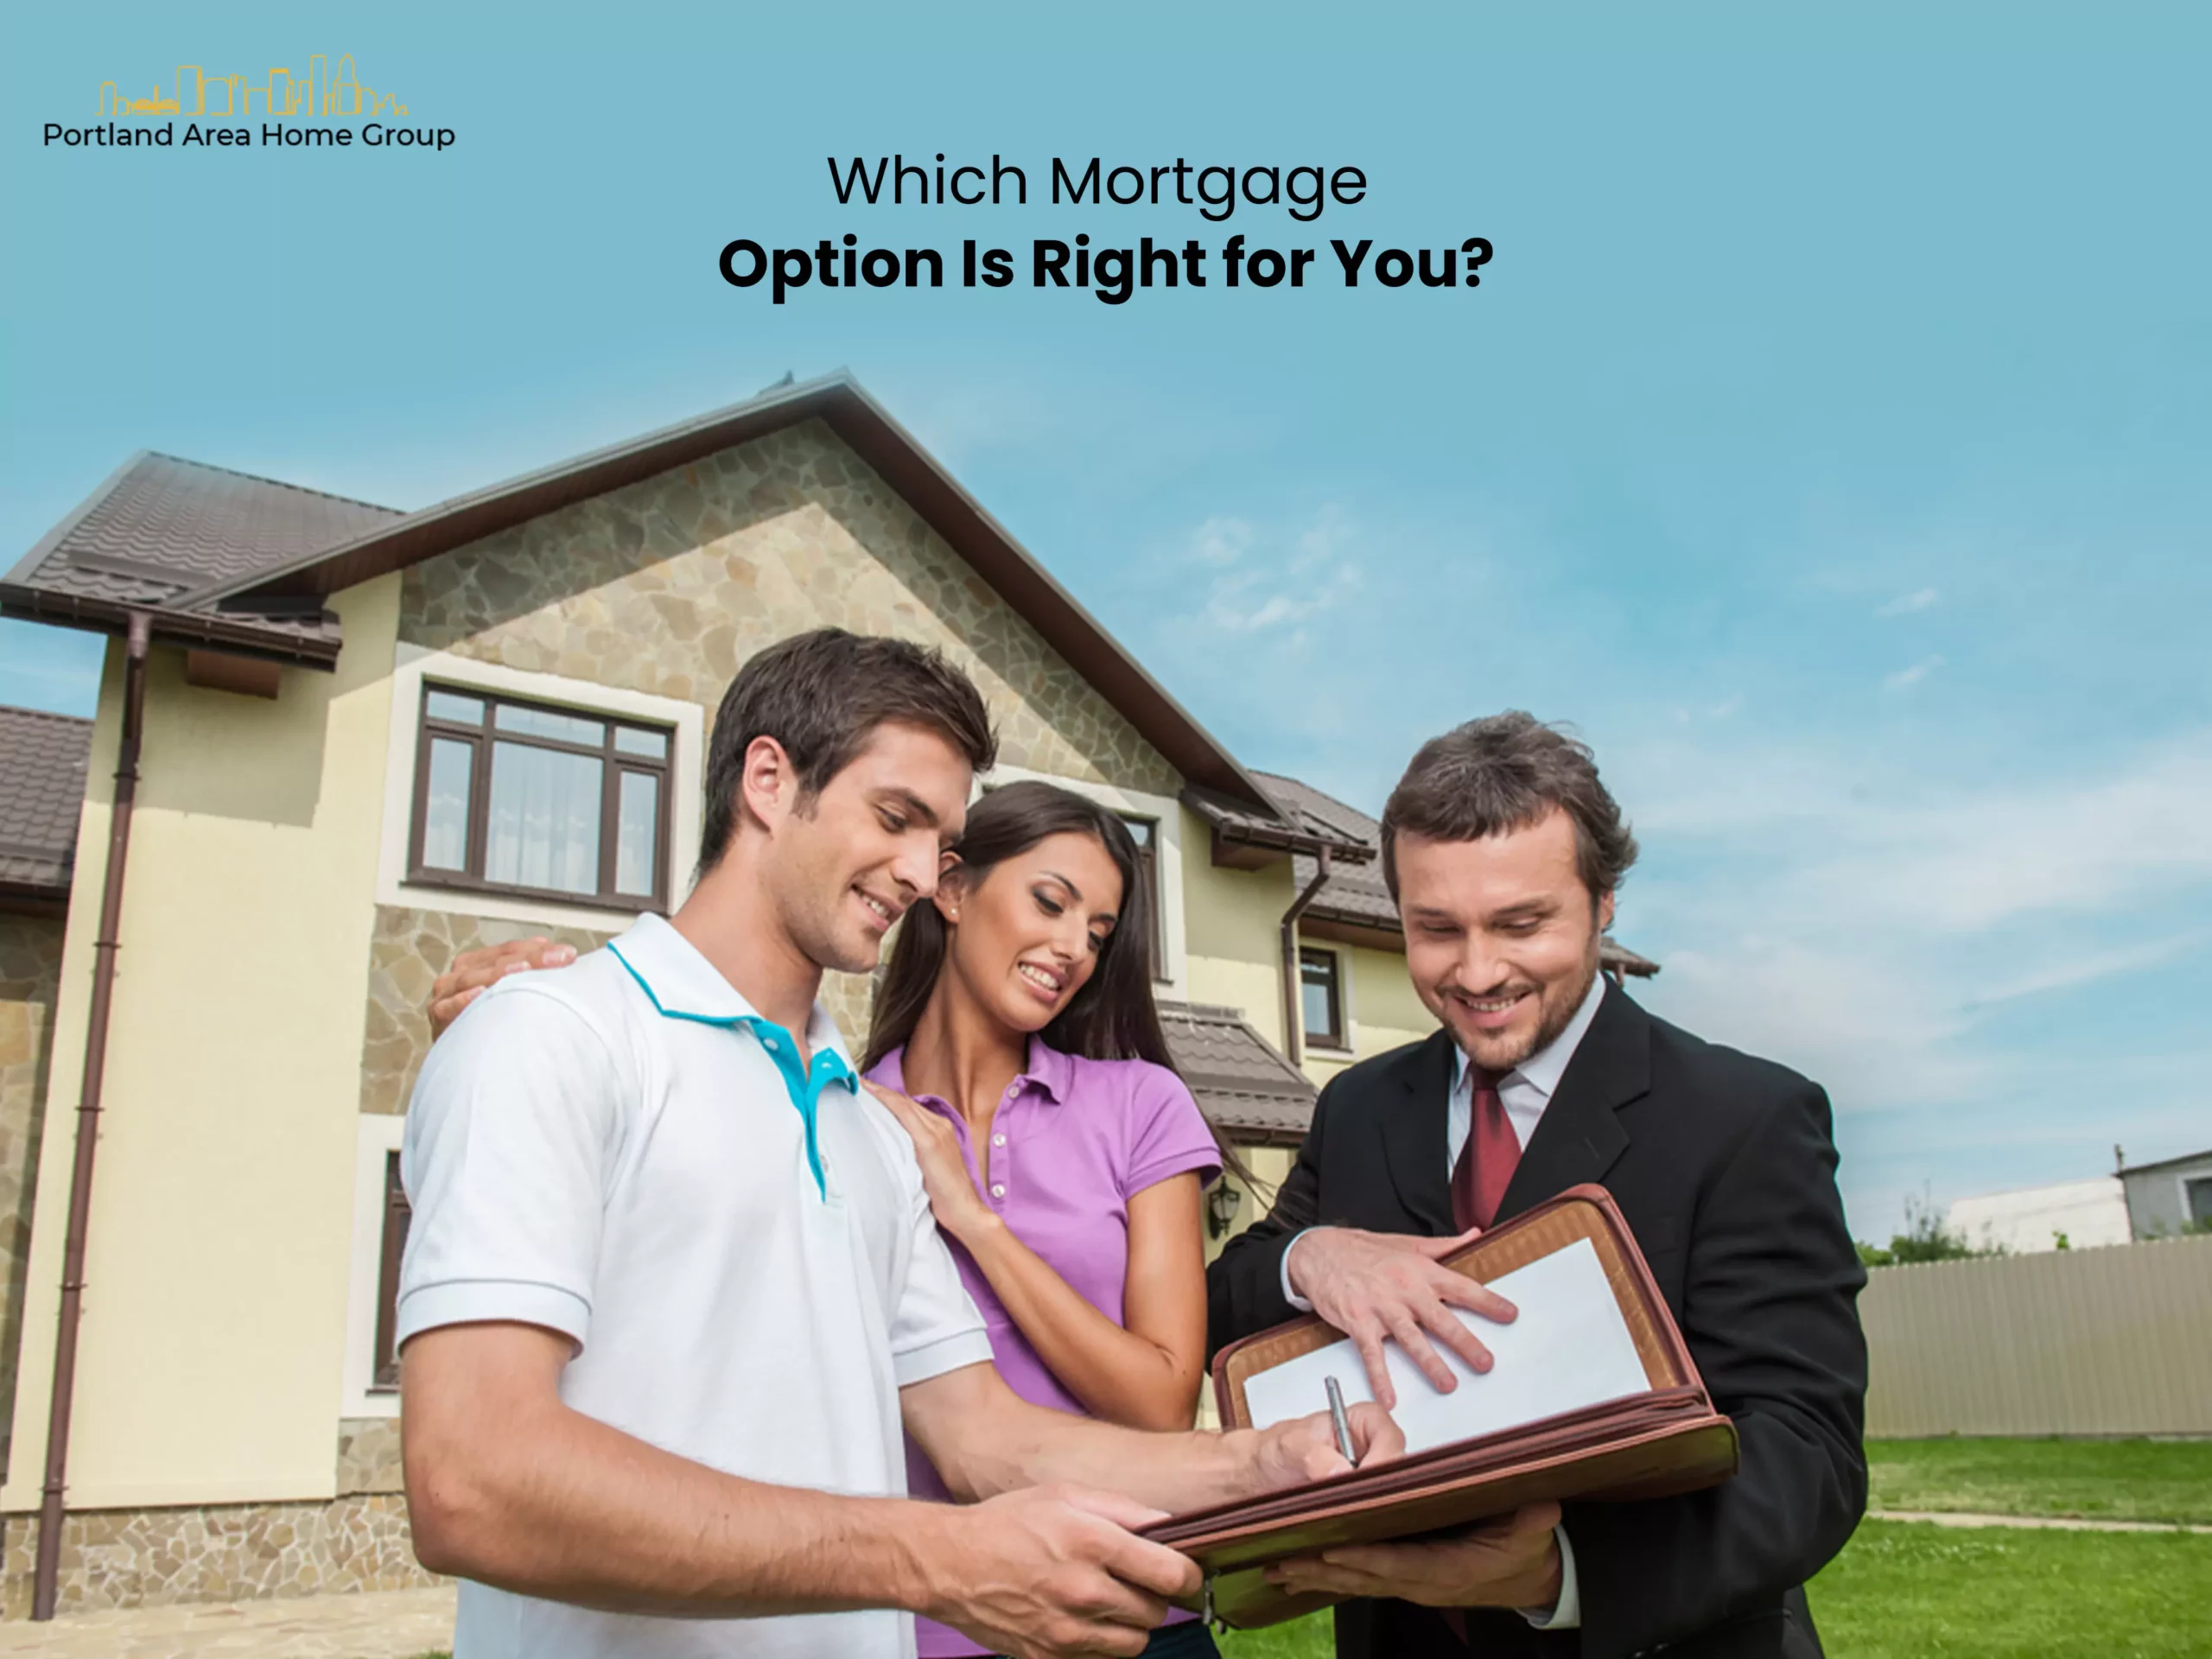 which-mortgage-option-is-right-for-you-6536a8fb04a4c-scaled